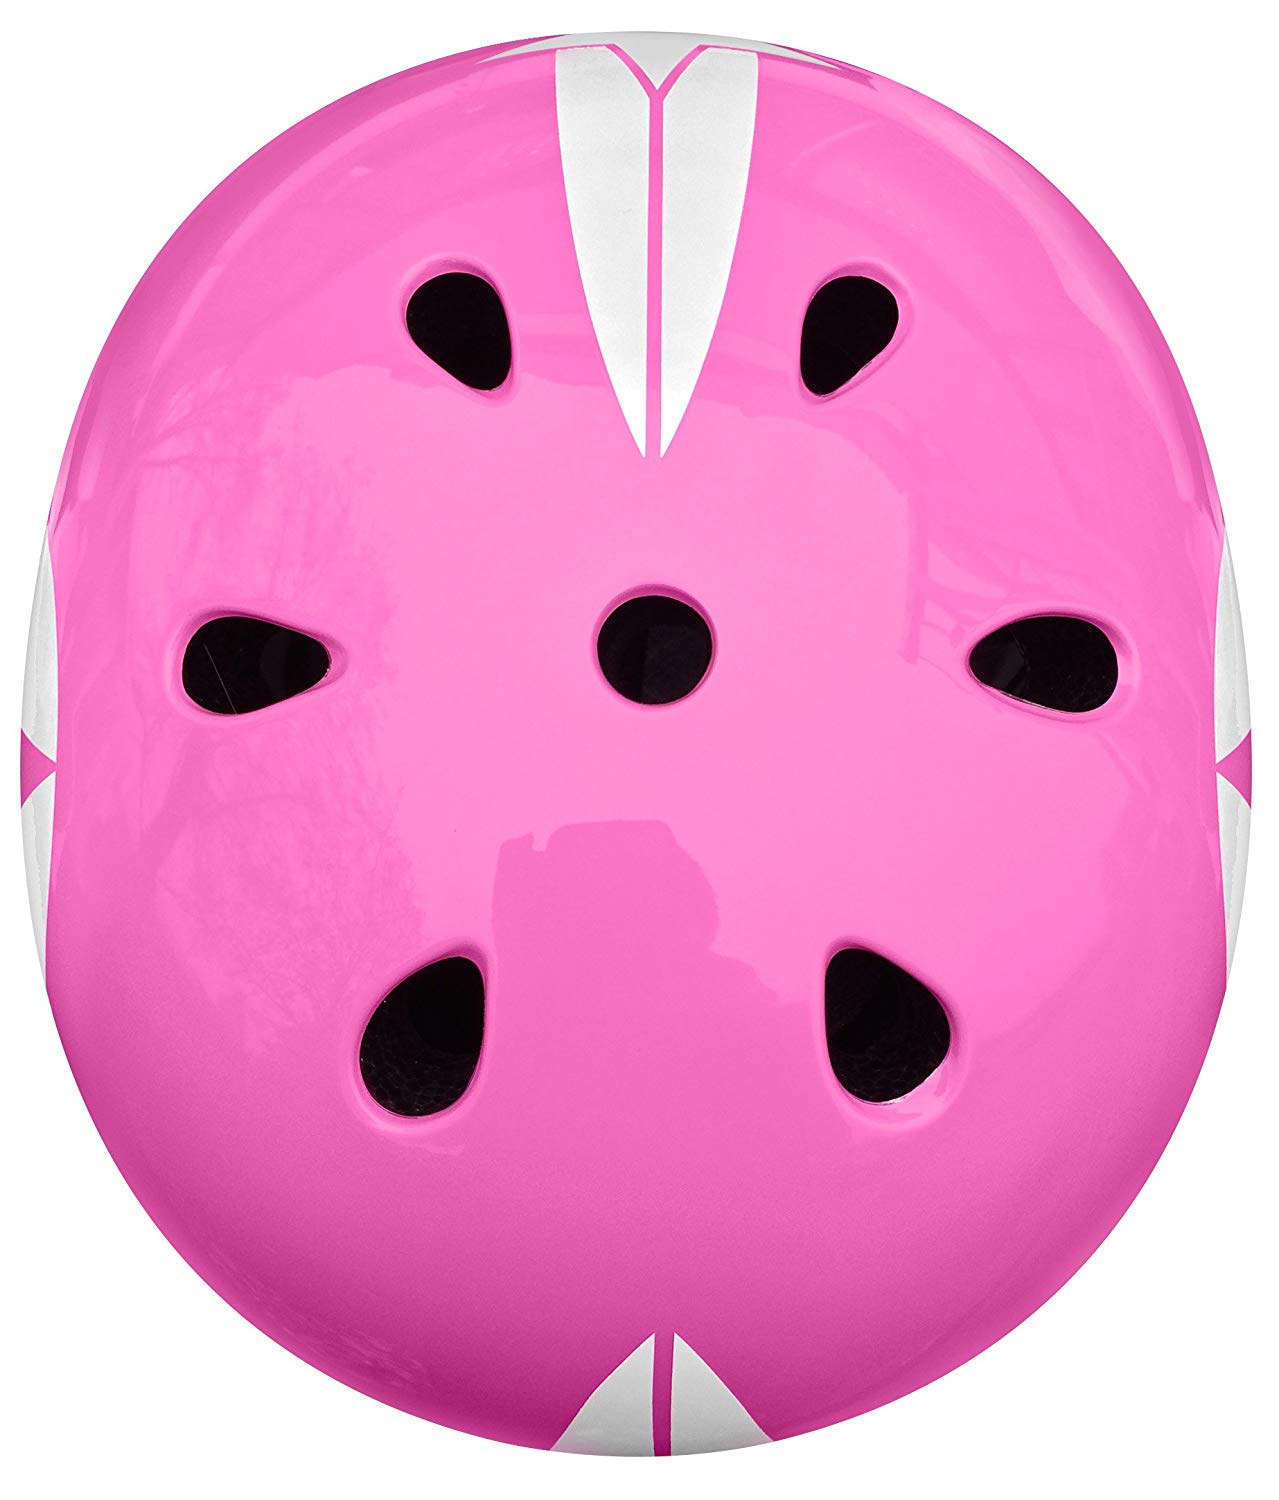 andere Norme Stamp JH674102 Skating Helmet Pink Star with headring